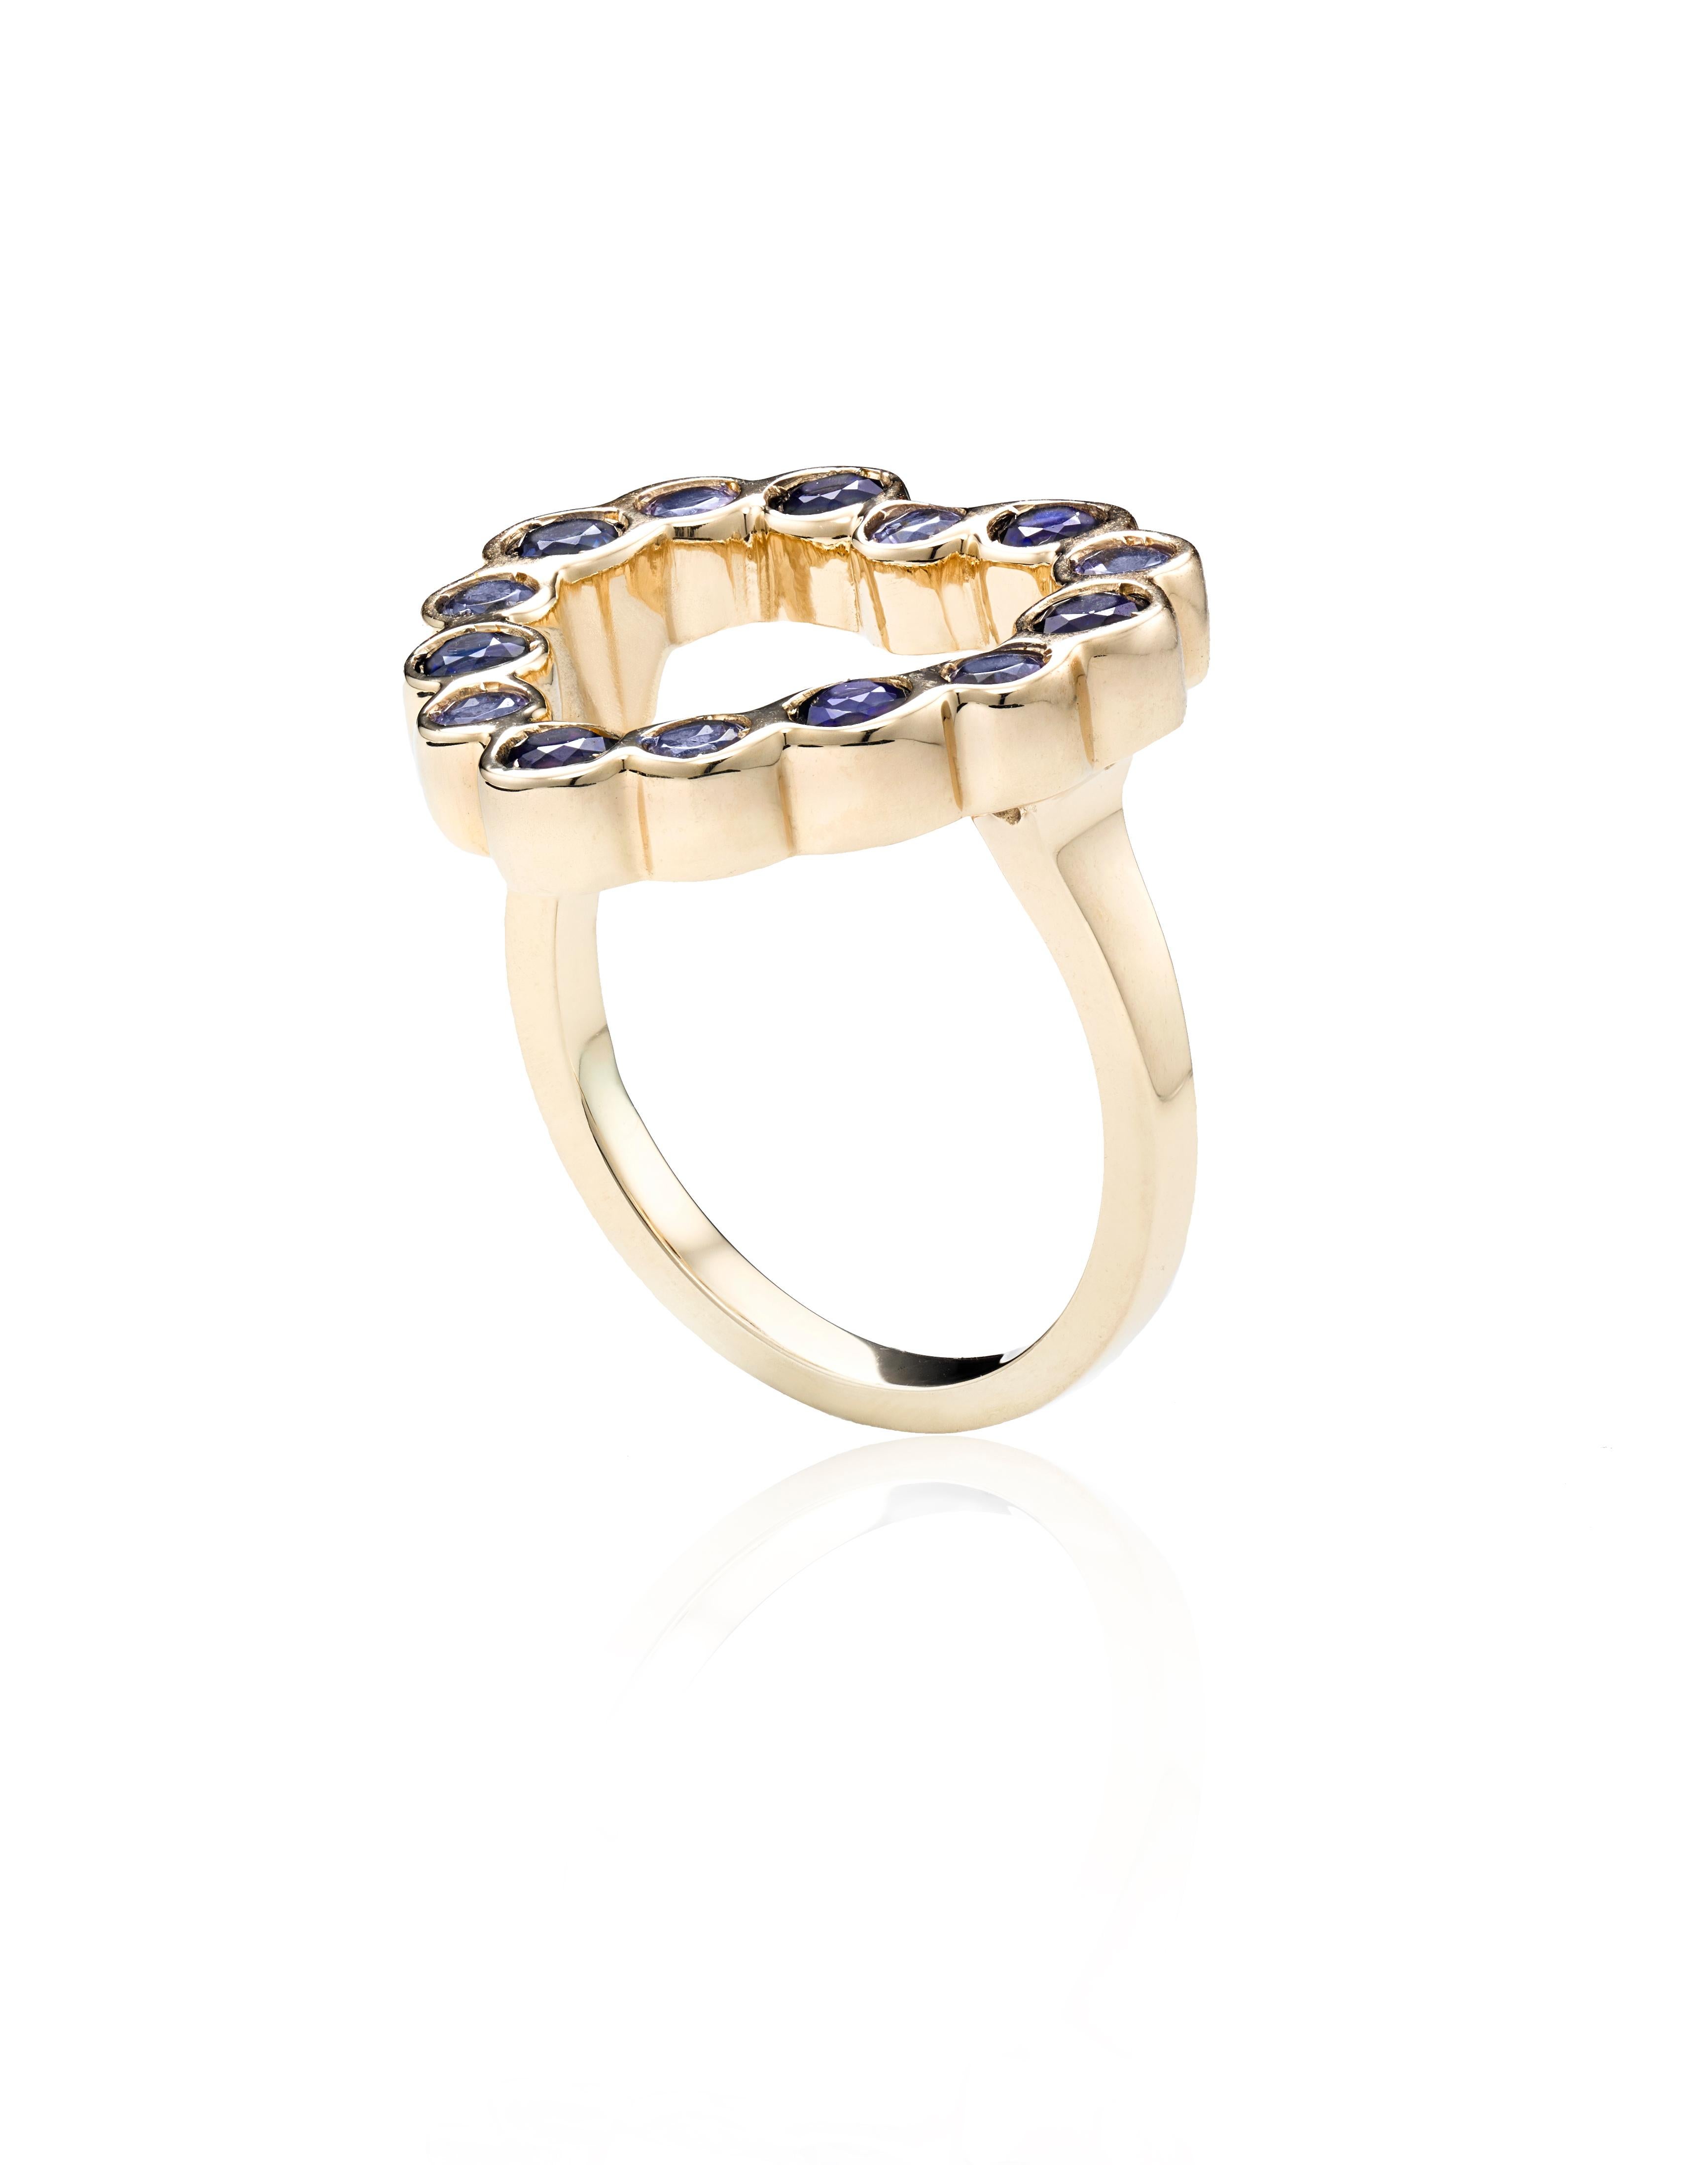 Wear this open heart ring composed of Hi June Parker's signature organic circles filled with
gemstones to express universal love for yours truly.

Inspired by seeing the cross-section view of life, as if slicing a tree to see its underlying